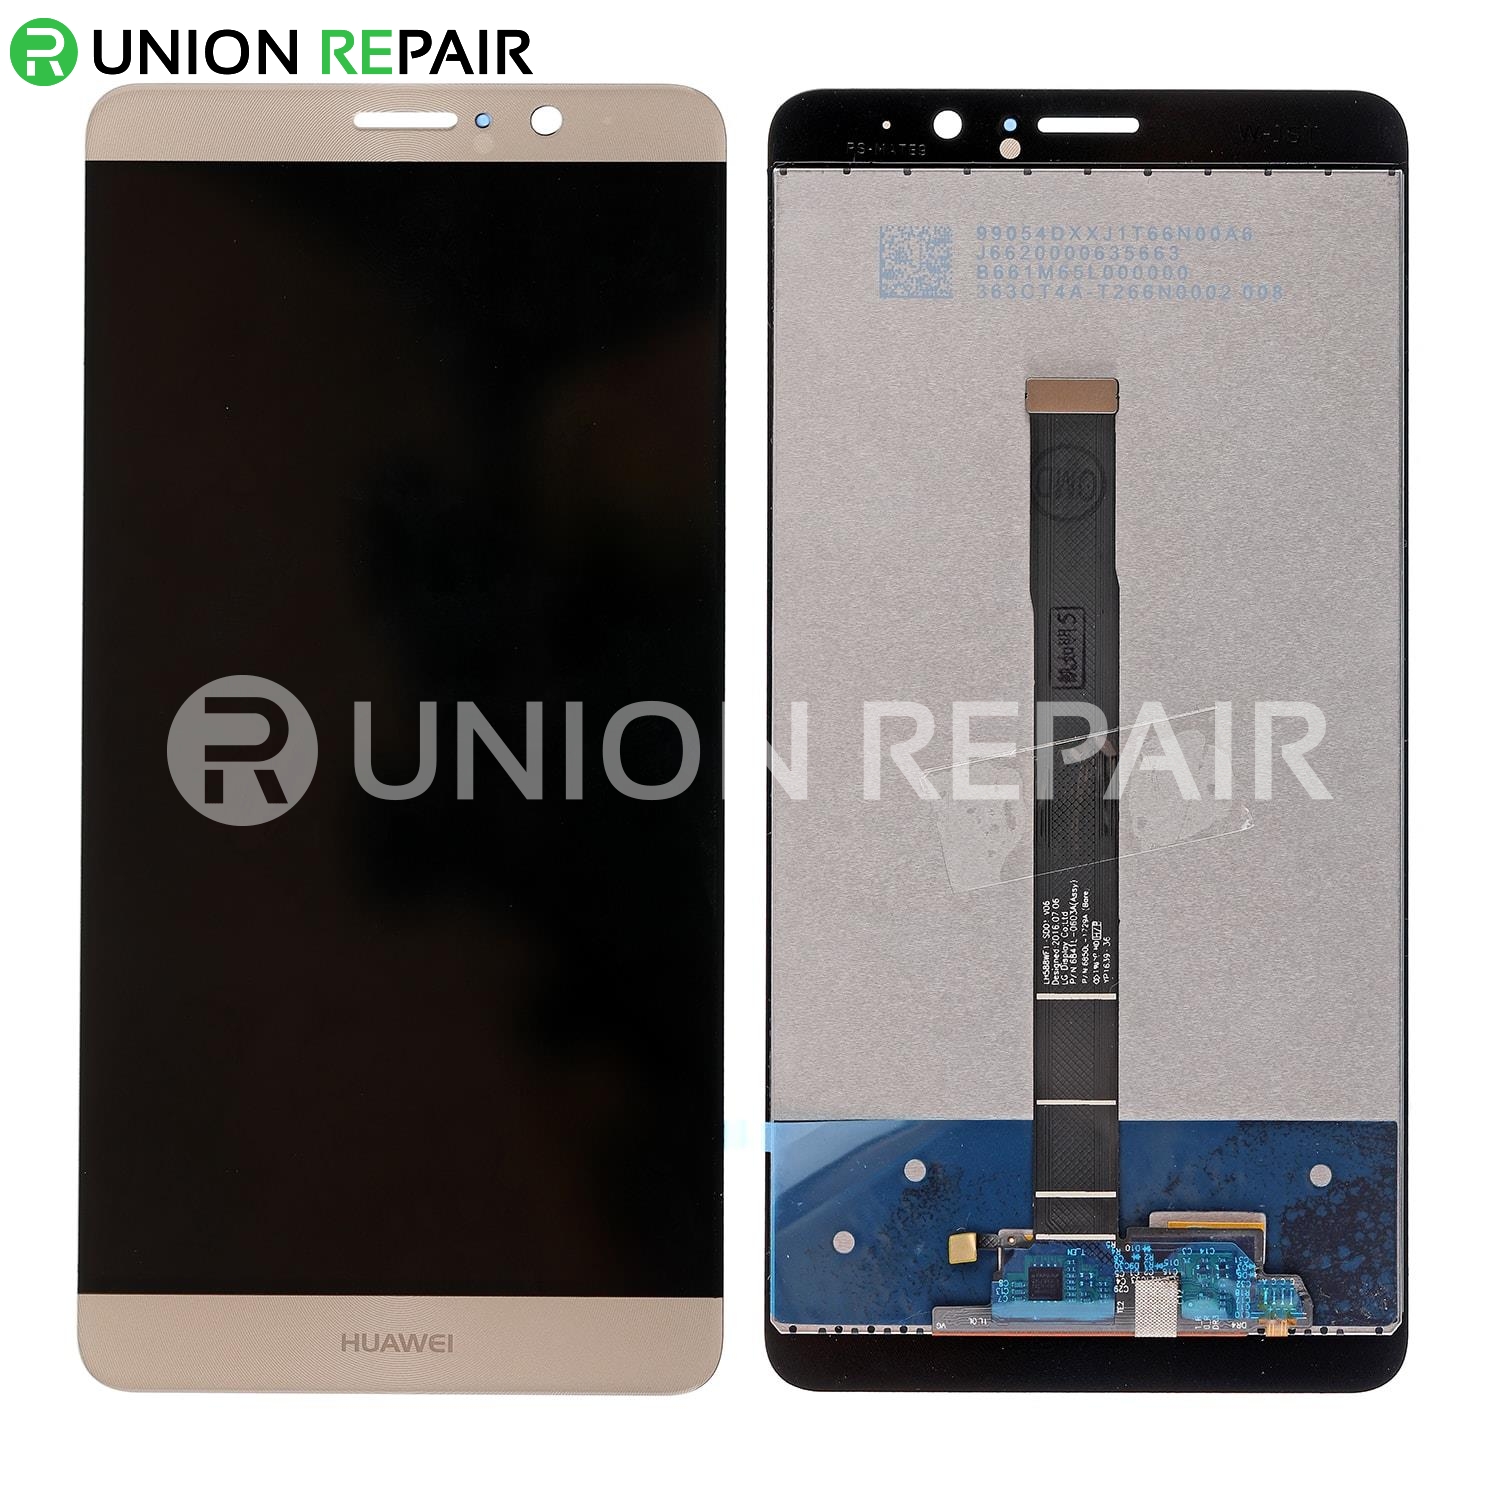 Replacement for Huawei Mate 9 LCD with Digitizer Assembly - Gold